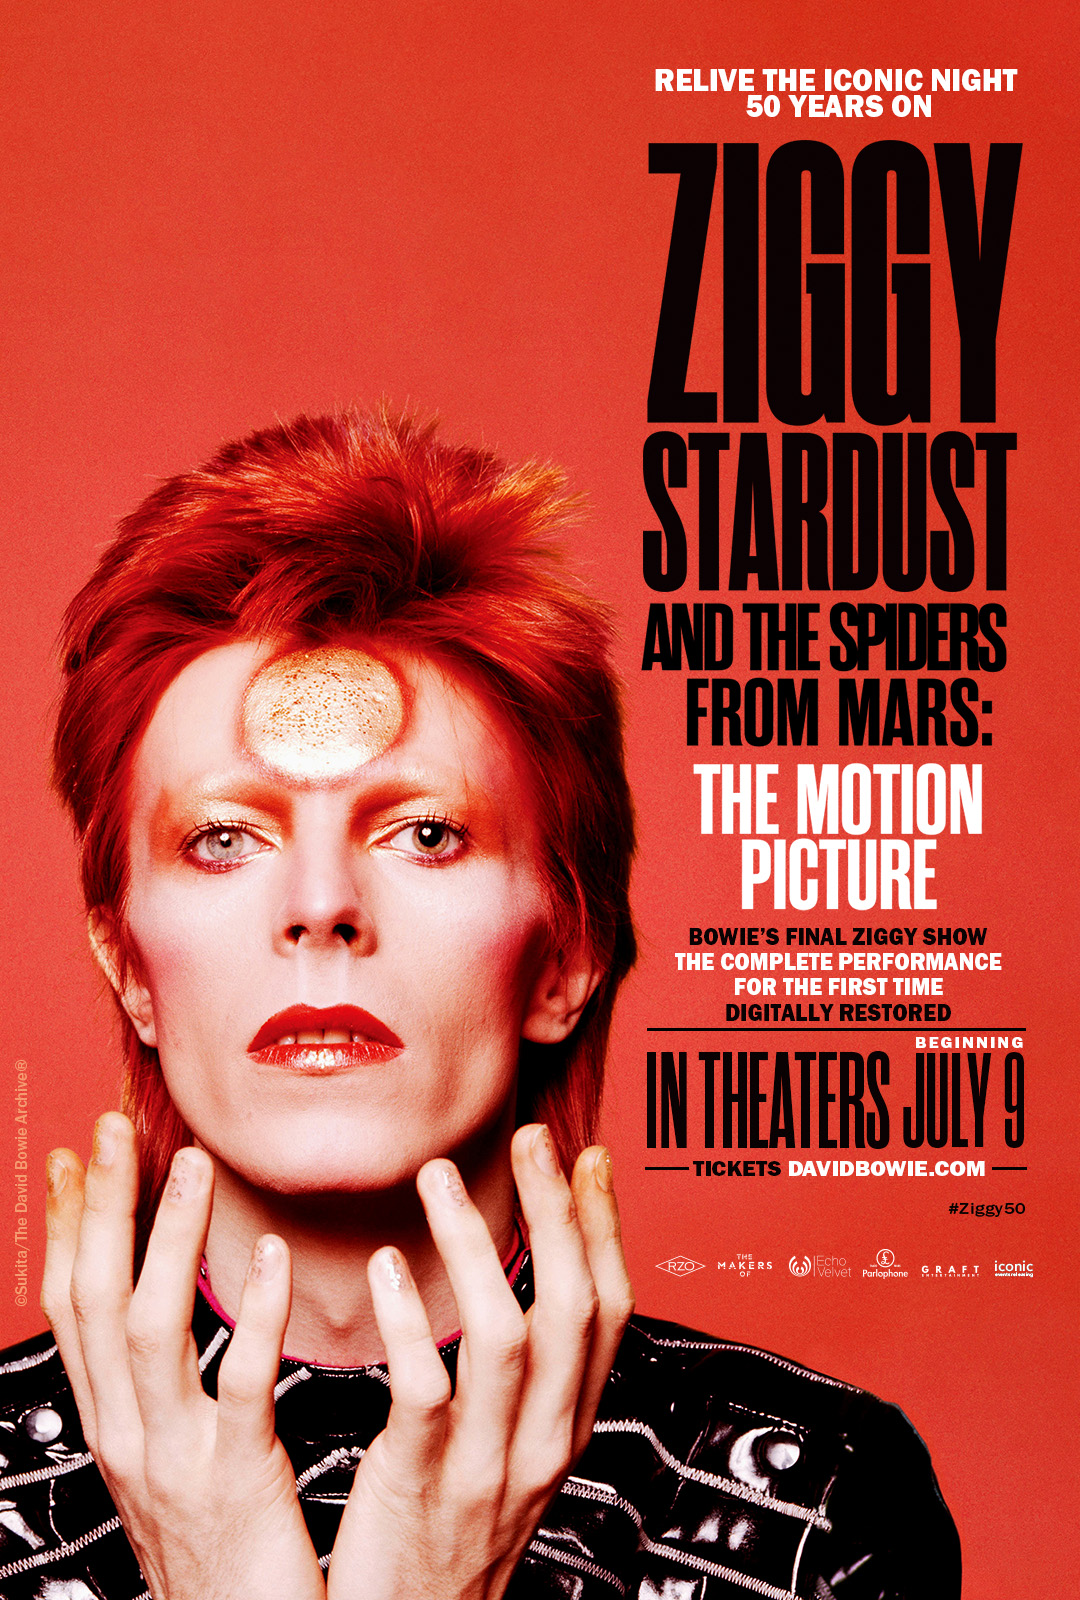 Ziggy Stardust & The Spiders from Mars: The Motion Picture Trailer